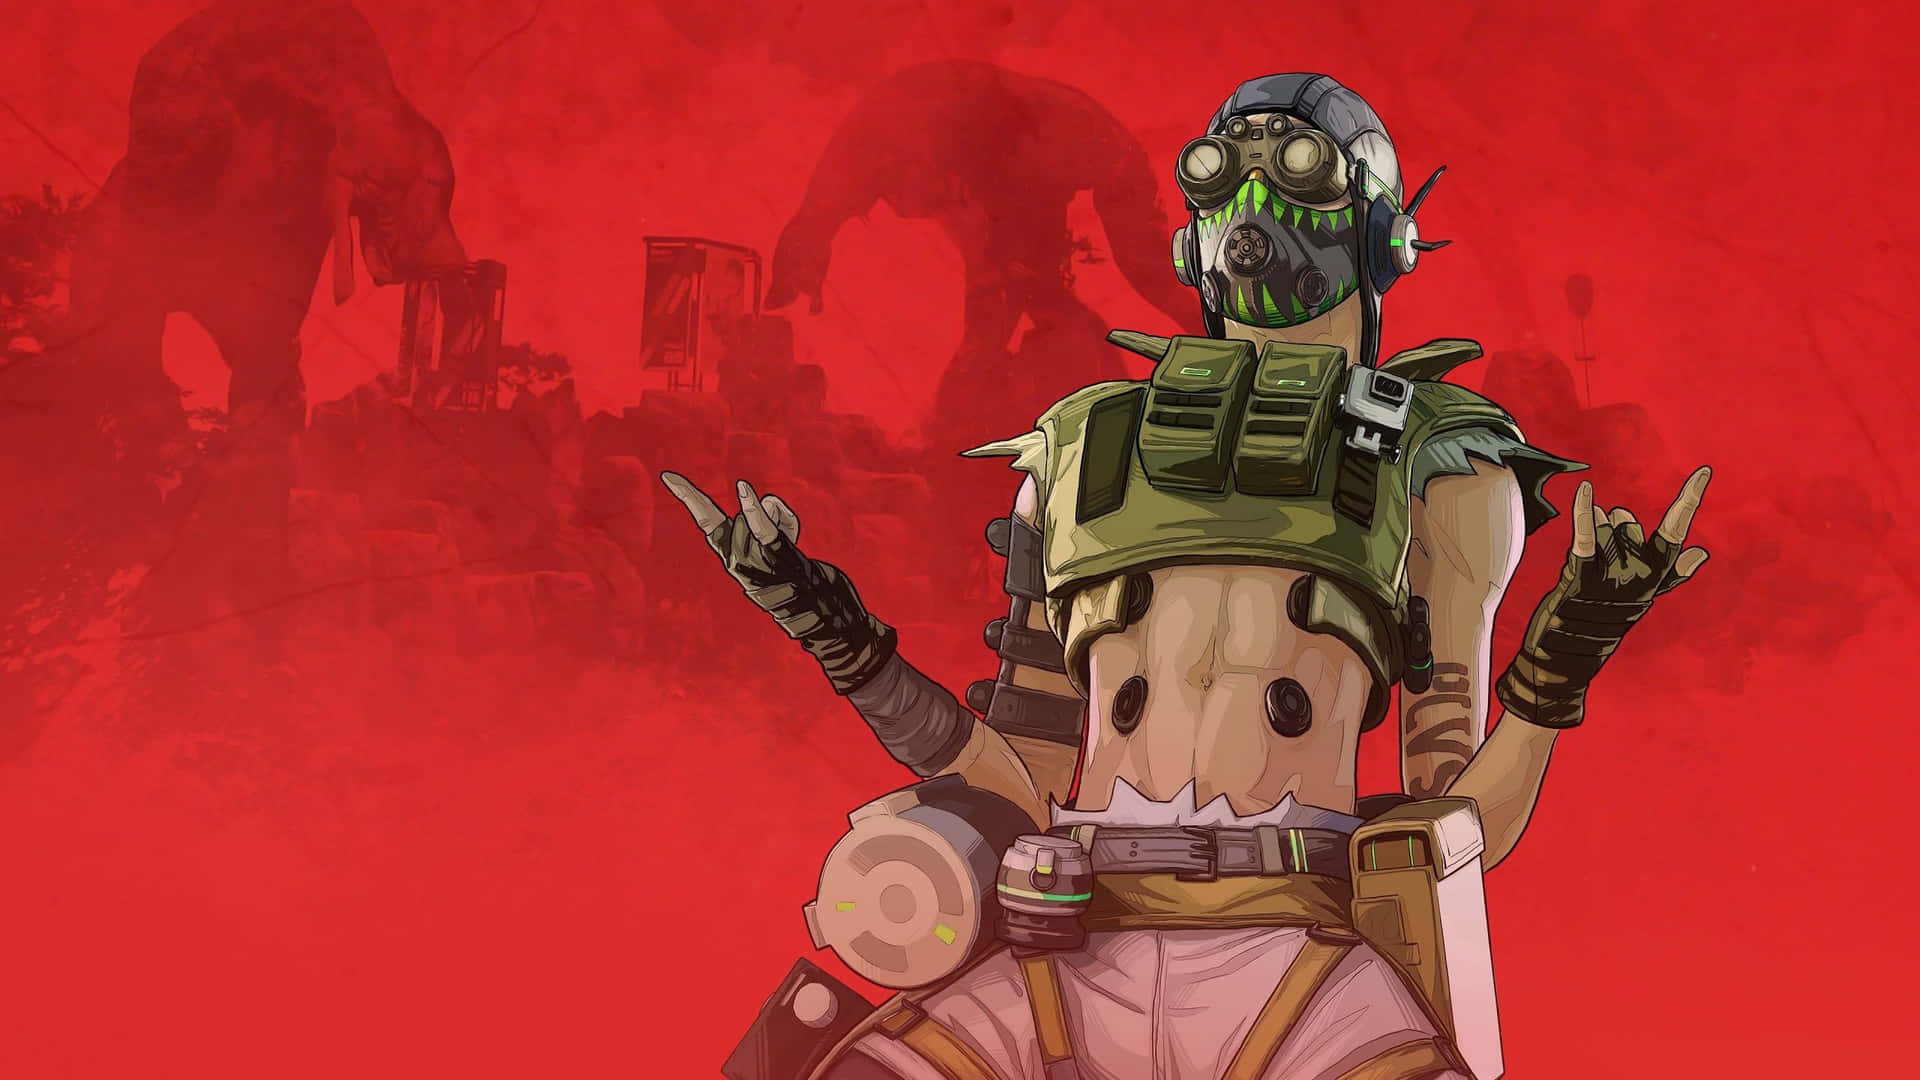 Conquer The Outlands By Outsmarting Your Opponents In Apex Legends Wallpaper